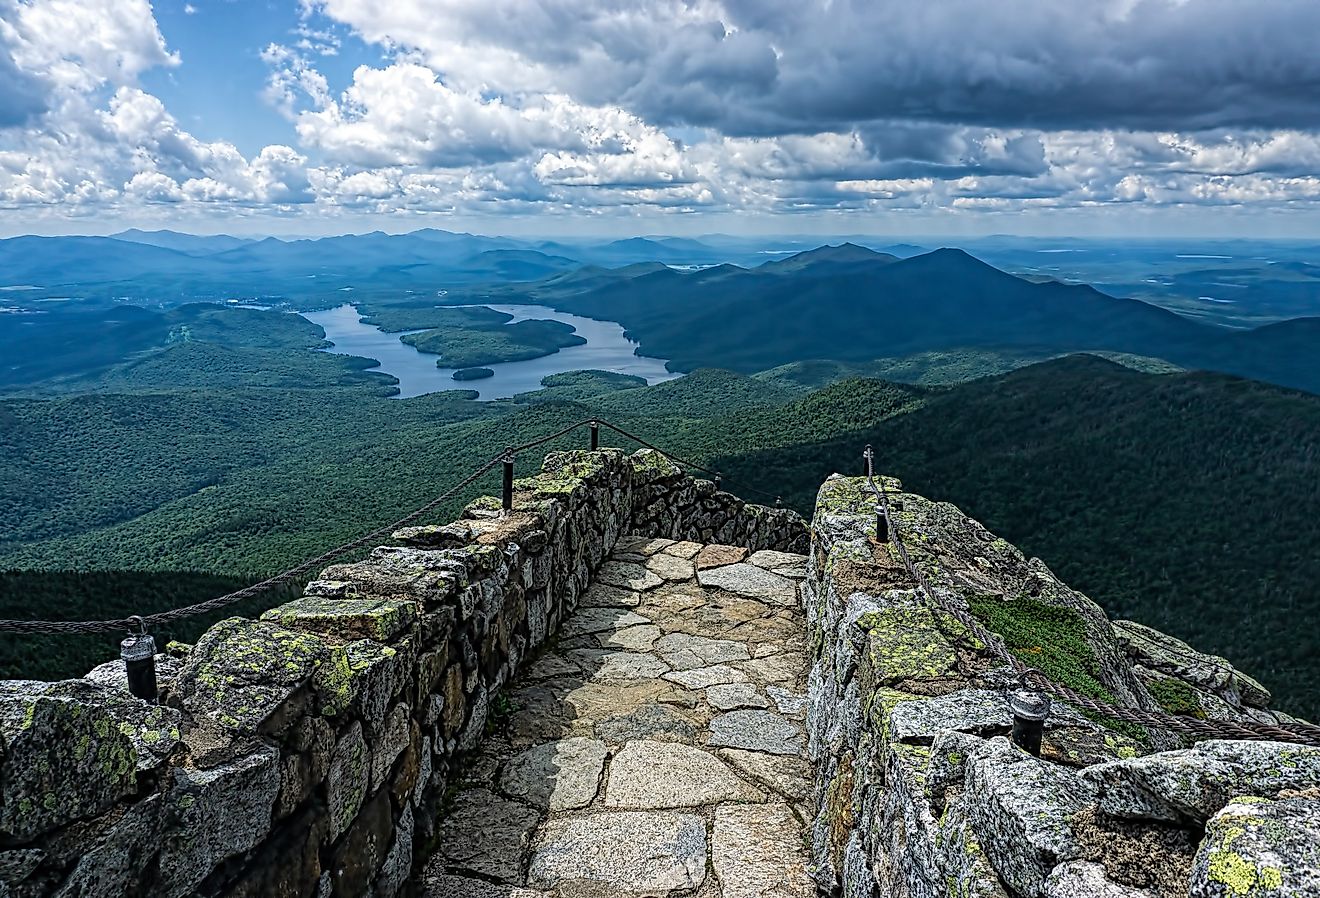 The view from the stone path on Whiteface Mountain, near Wilmington, looking over Lake Placid and the Adirondack Mountains.